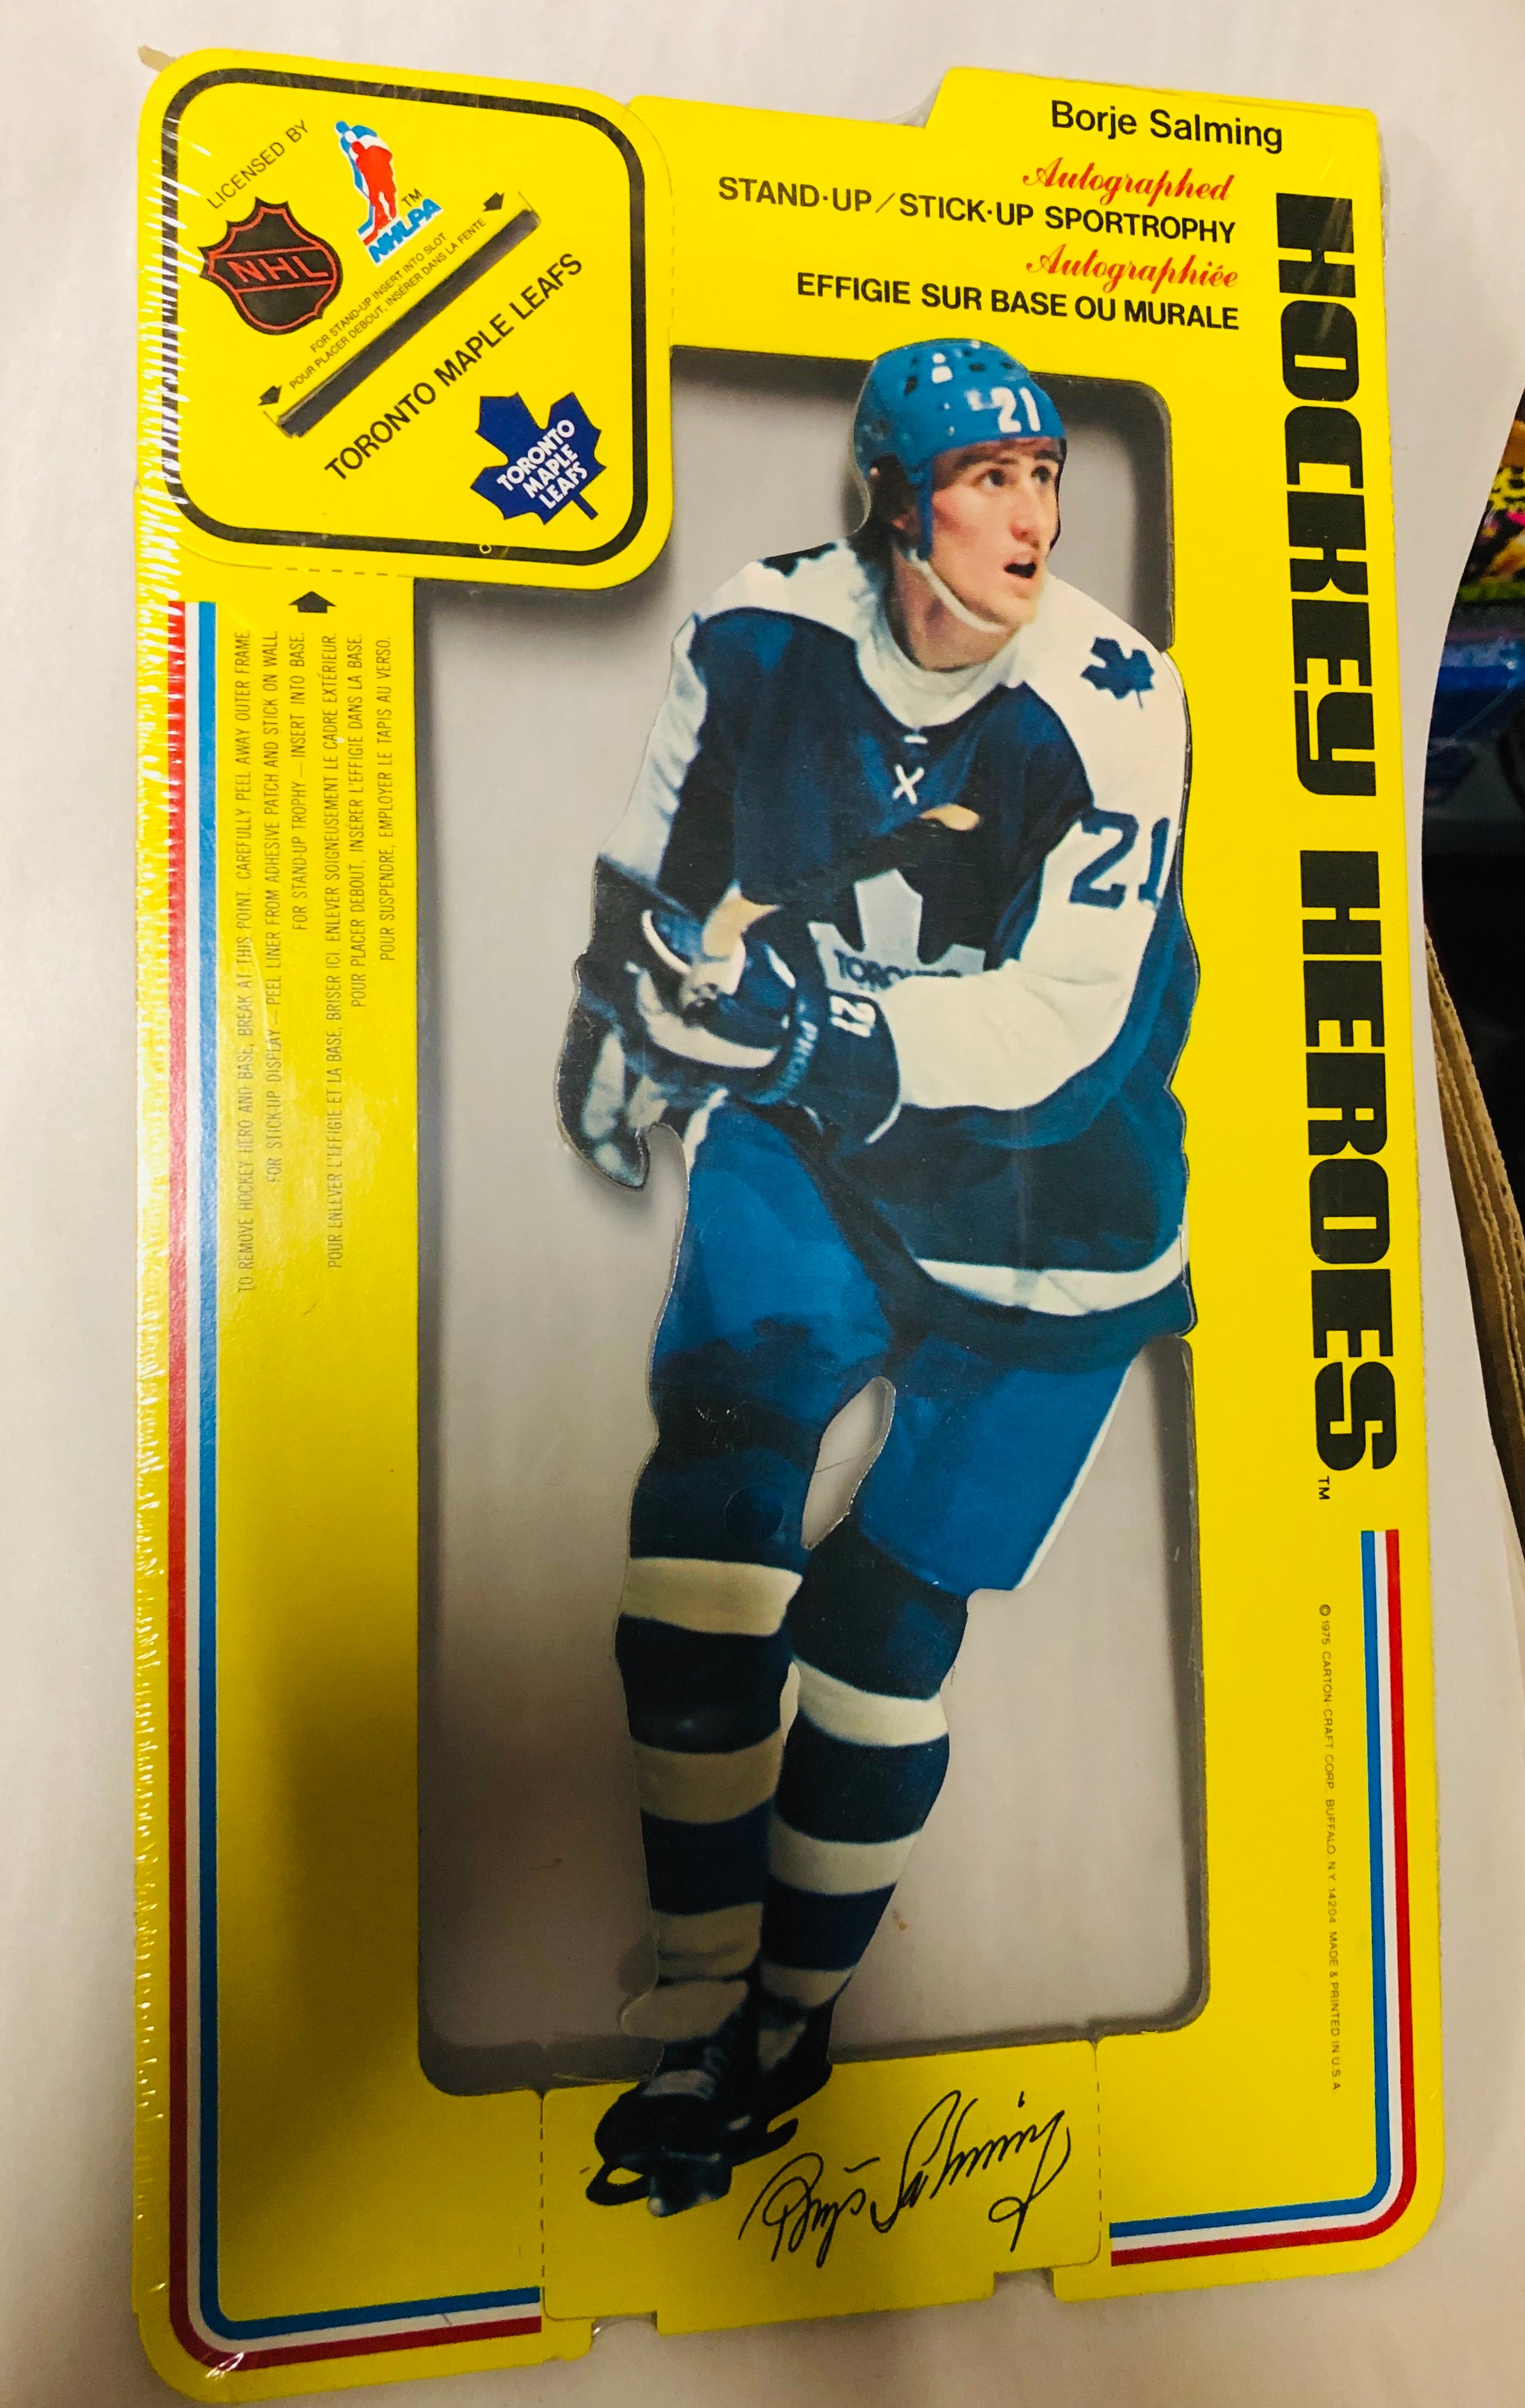 Toronto Maple Leafs Borje Salming cardboard stand up 1970s